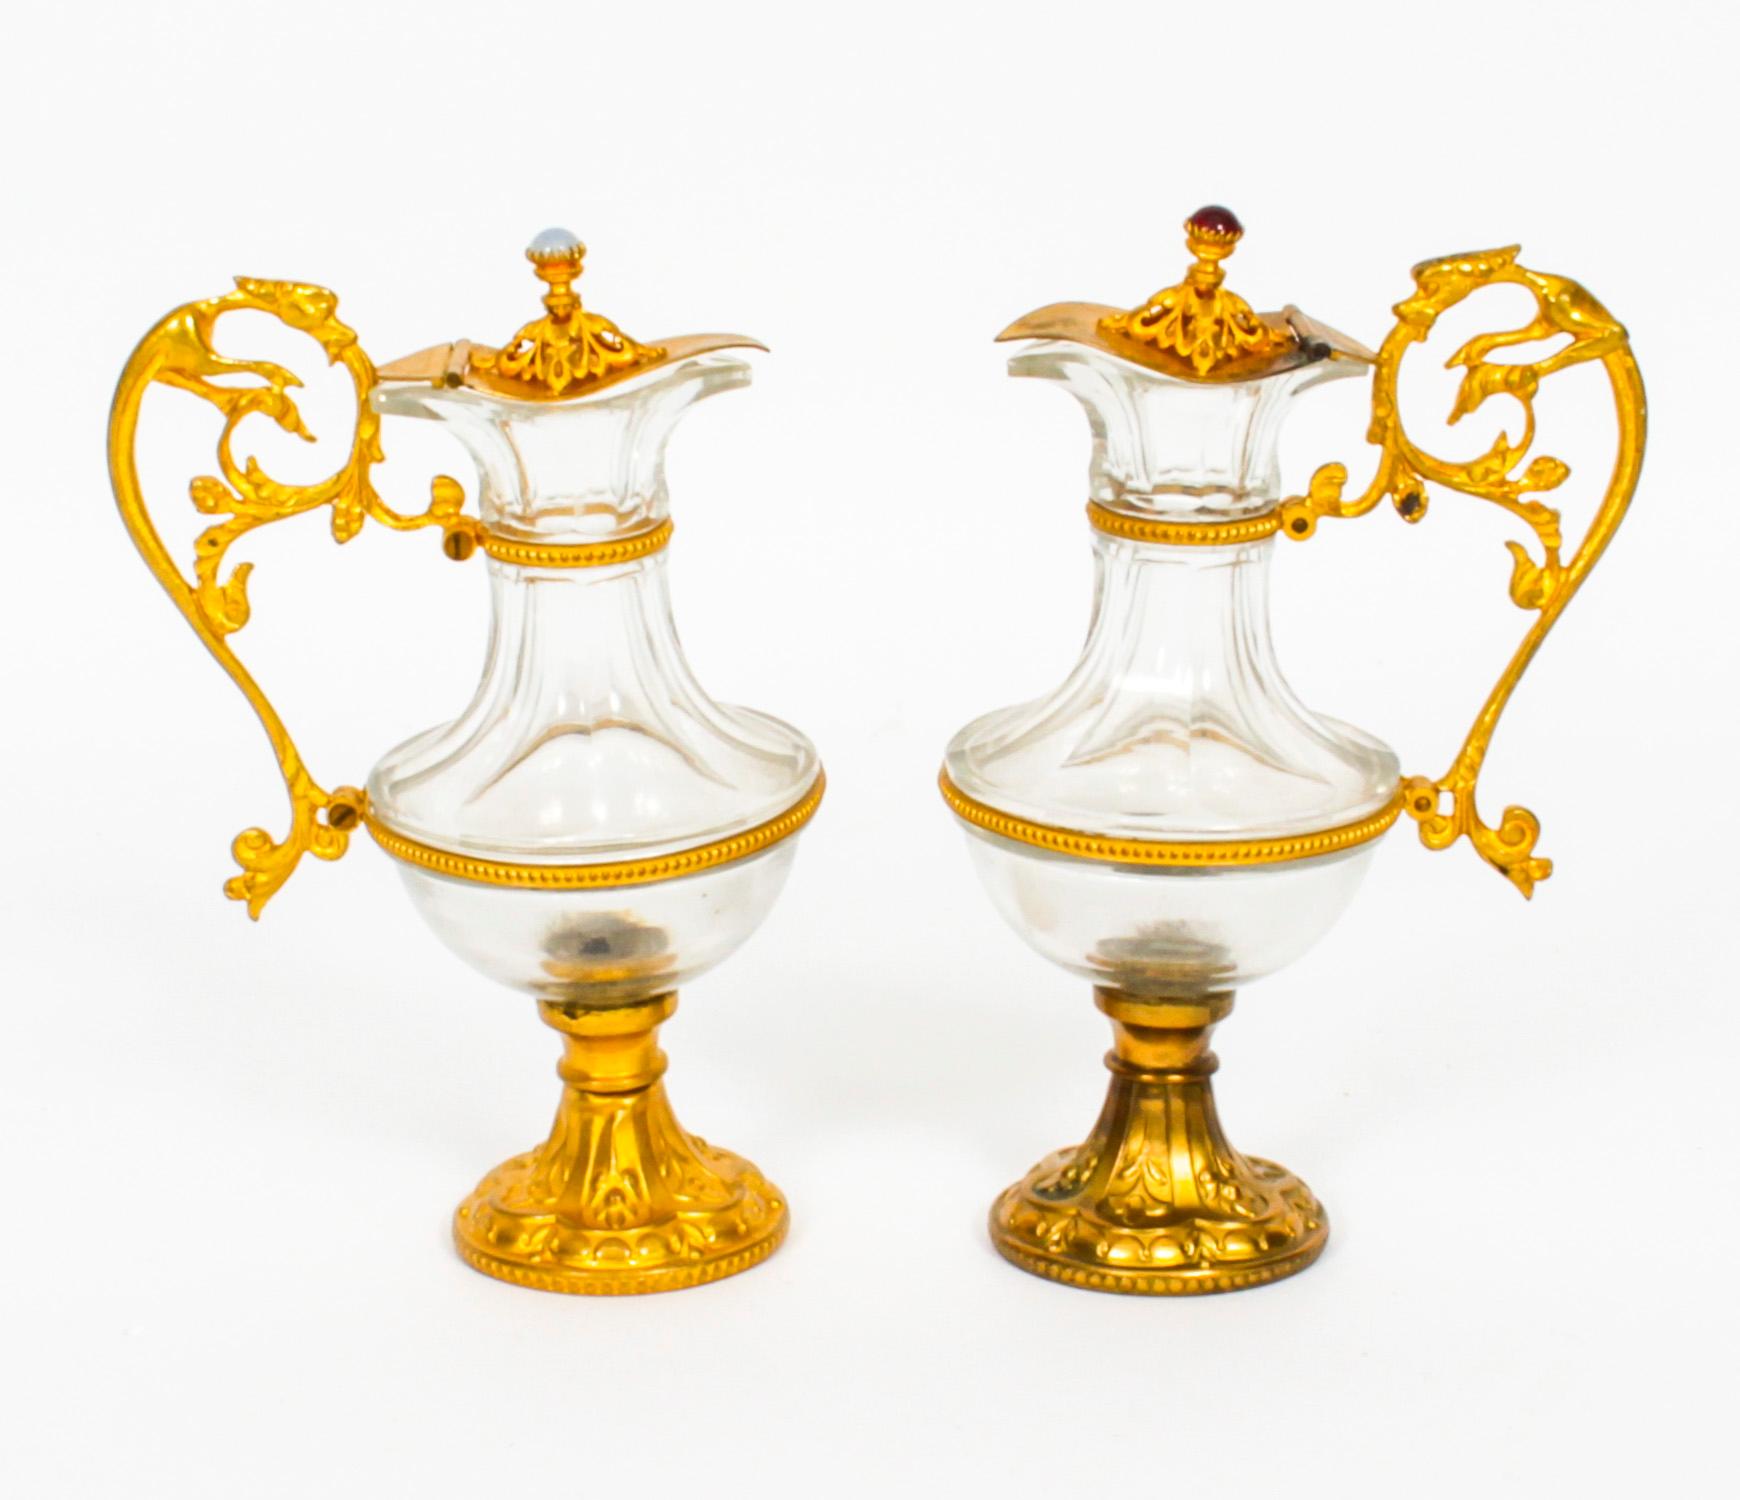 Antique Pair of French Ormolu & Glass Ewers, 19th Century For Sale 9